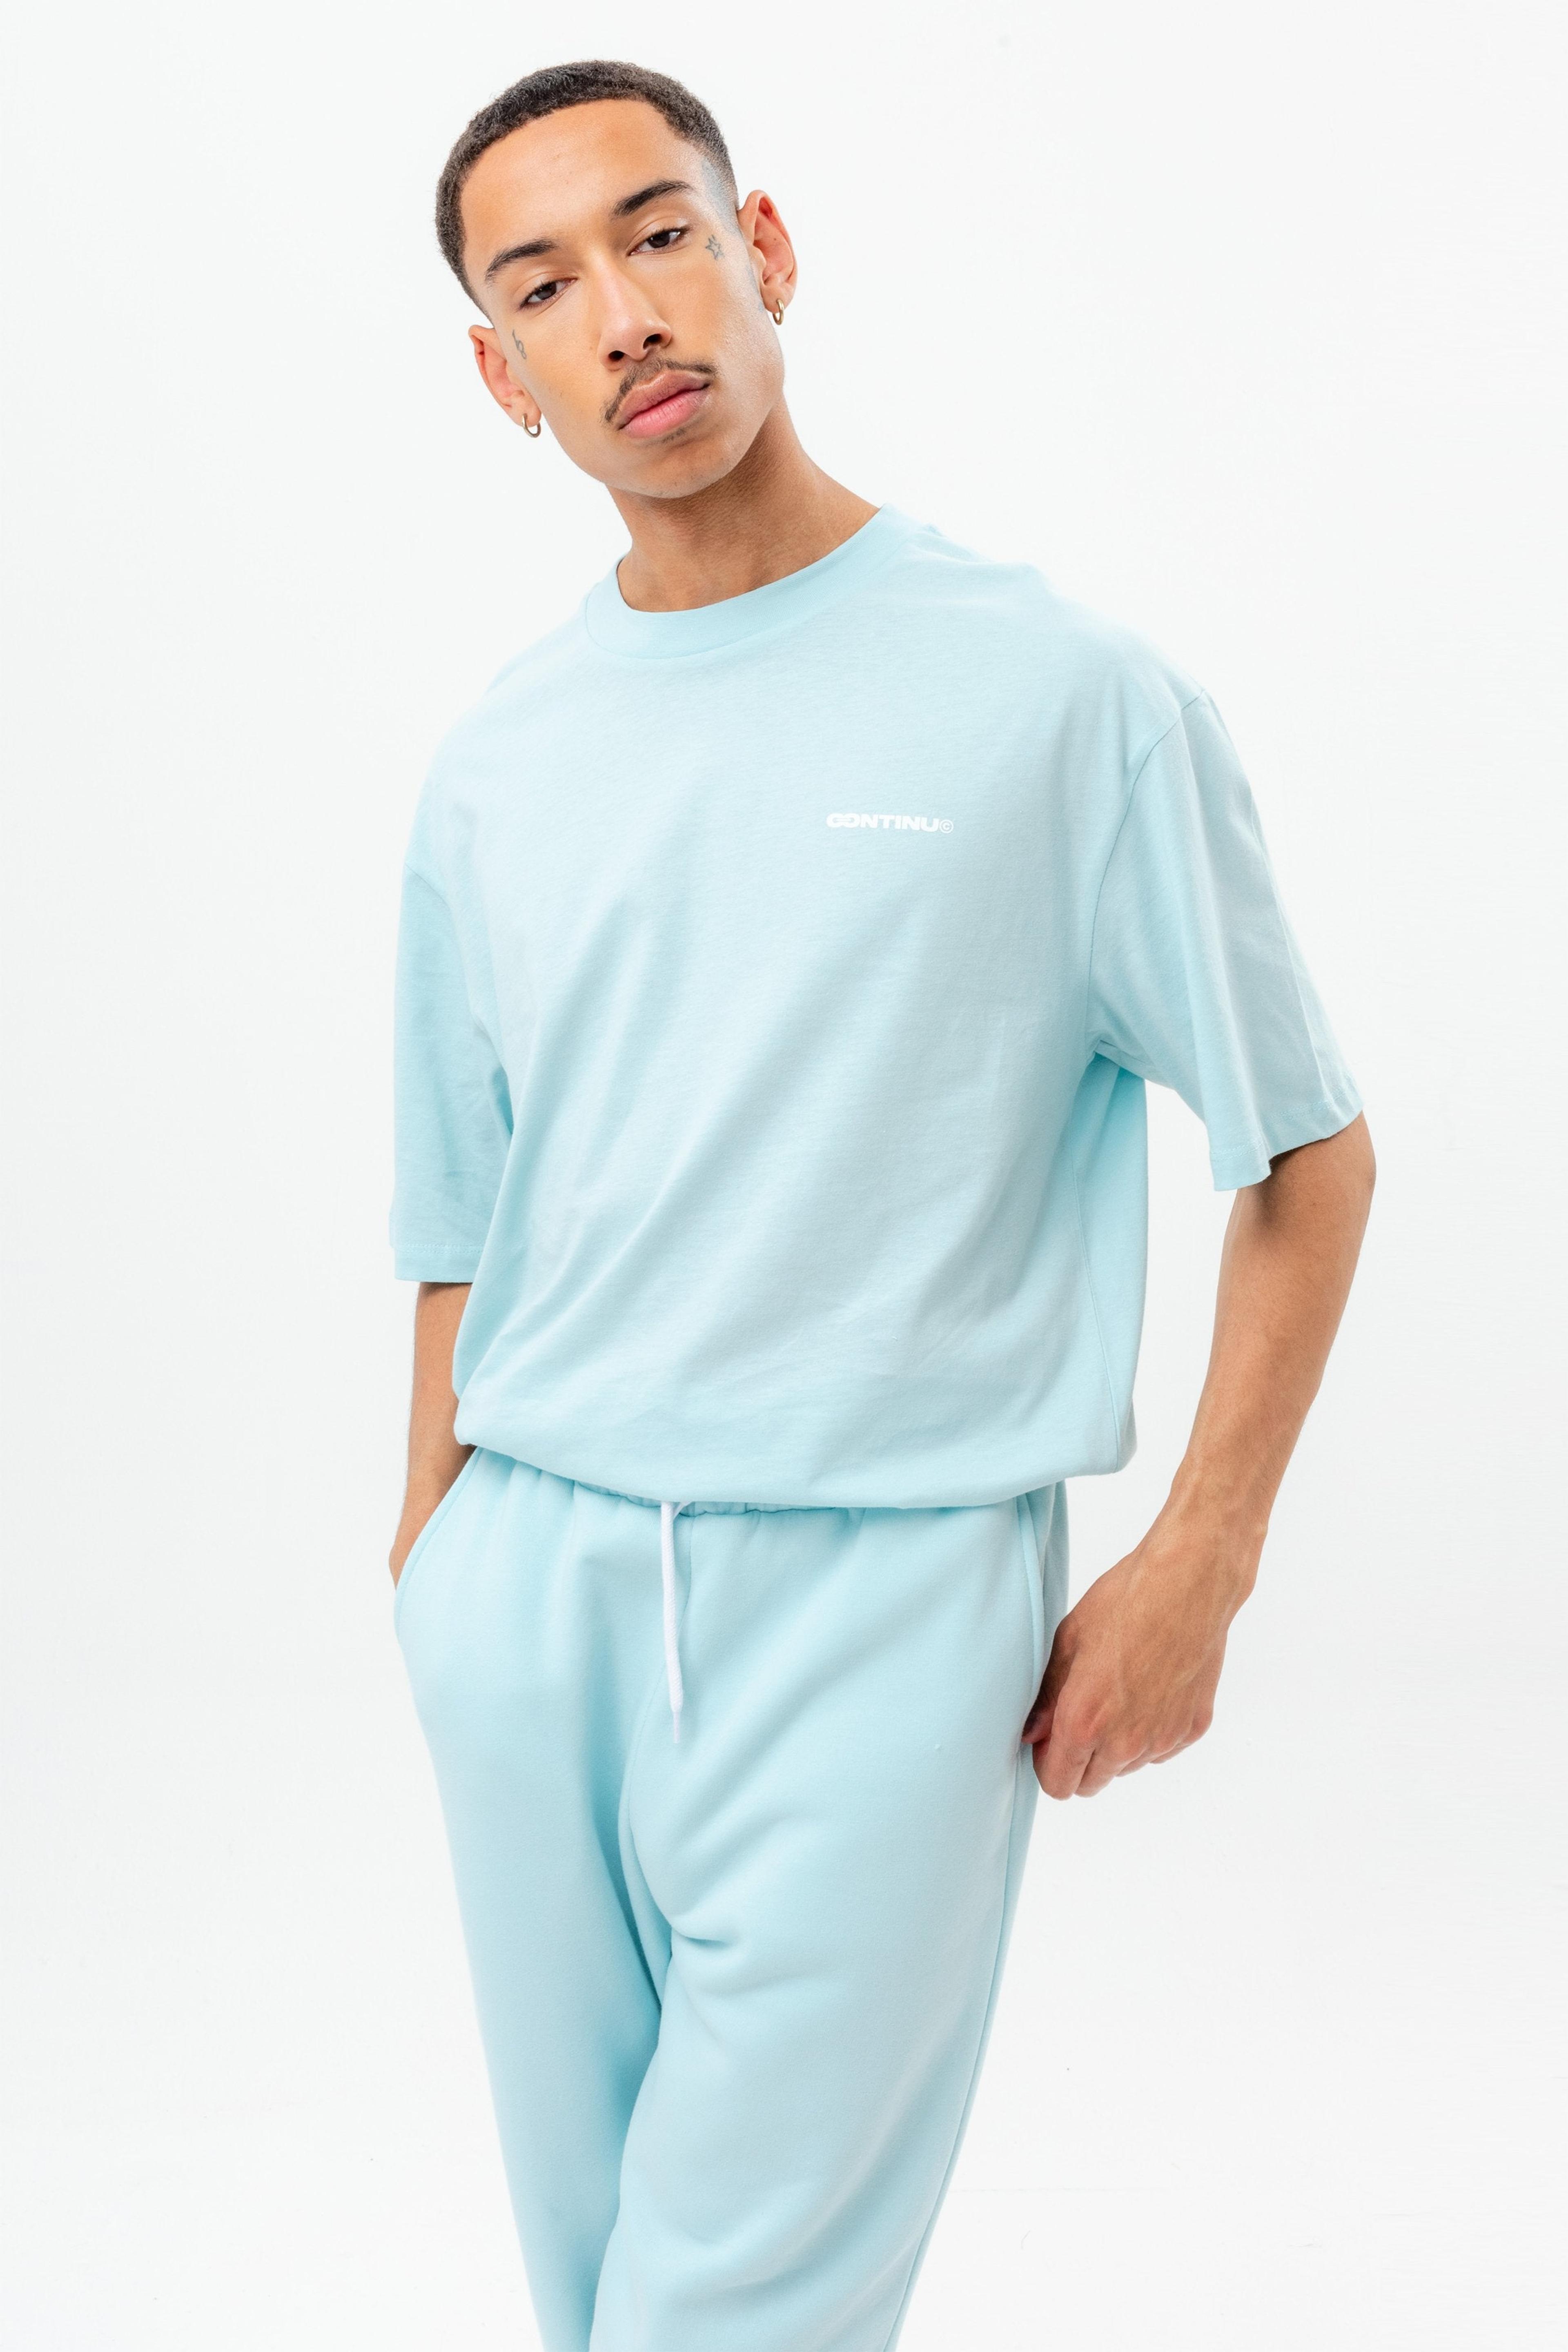 Alternate View 2 of CONTINU8 PALE BLUE OVERSIZED T-SHIRT